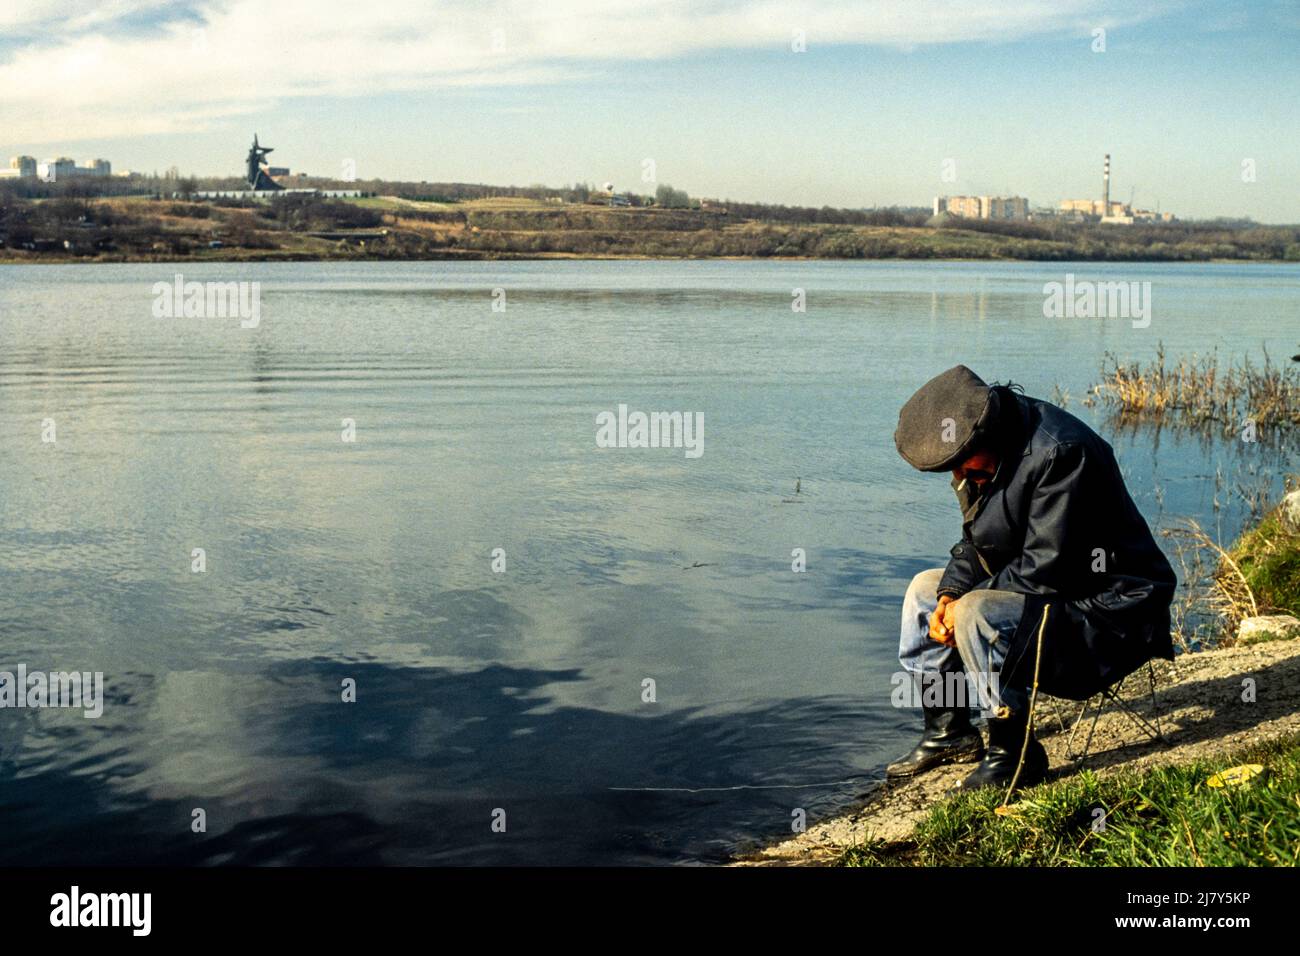 A man fishes in a lake with the Monument to Donbas Liberators in Lenin Comsomol park, Donetsk, in the background.  It was unveiled on May 8, 1984 and is the largest monument in the south-east of Ukraine, October 1989. Stock Photo